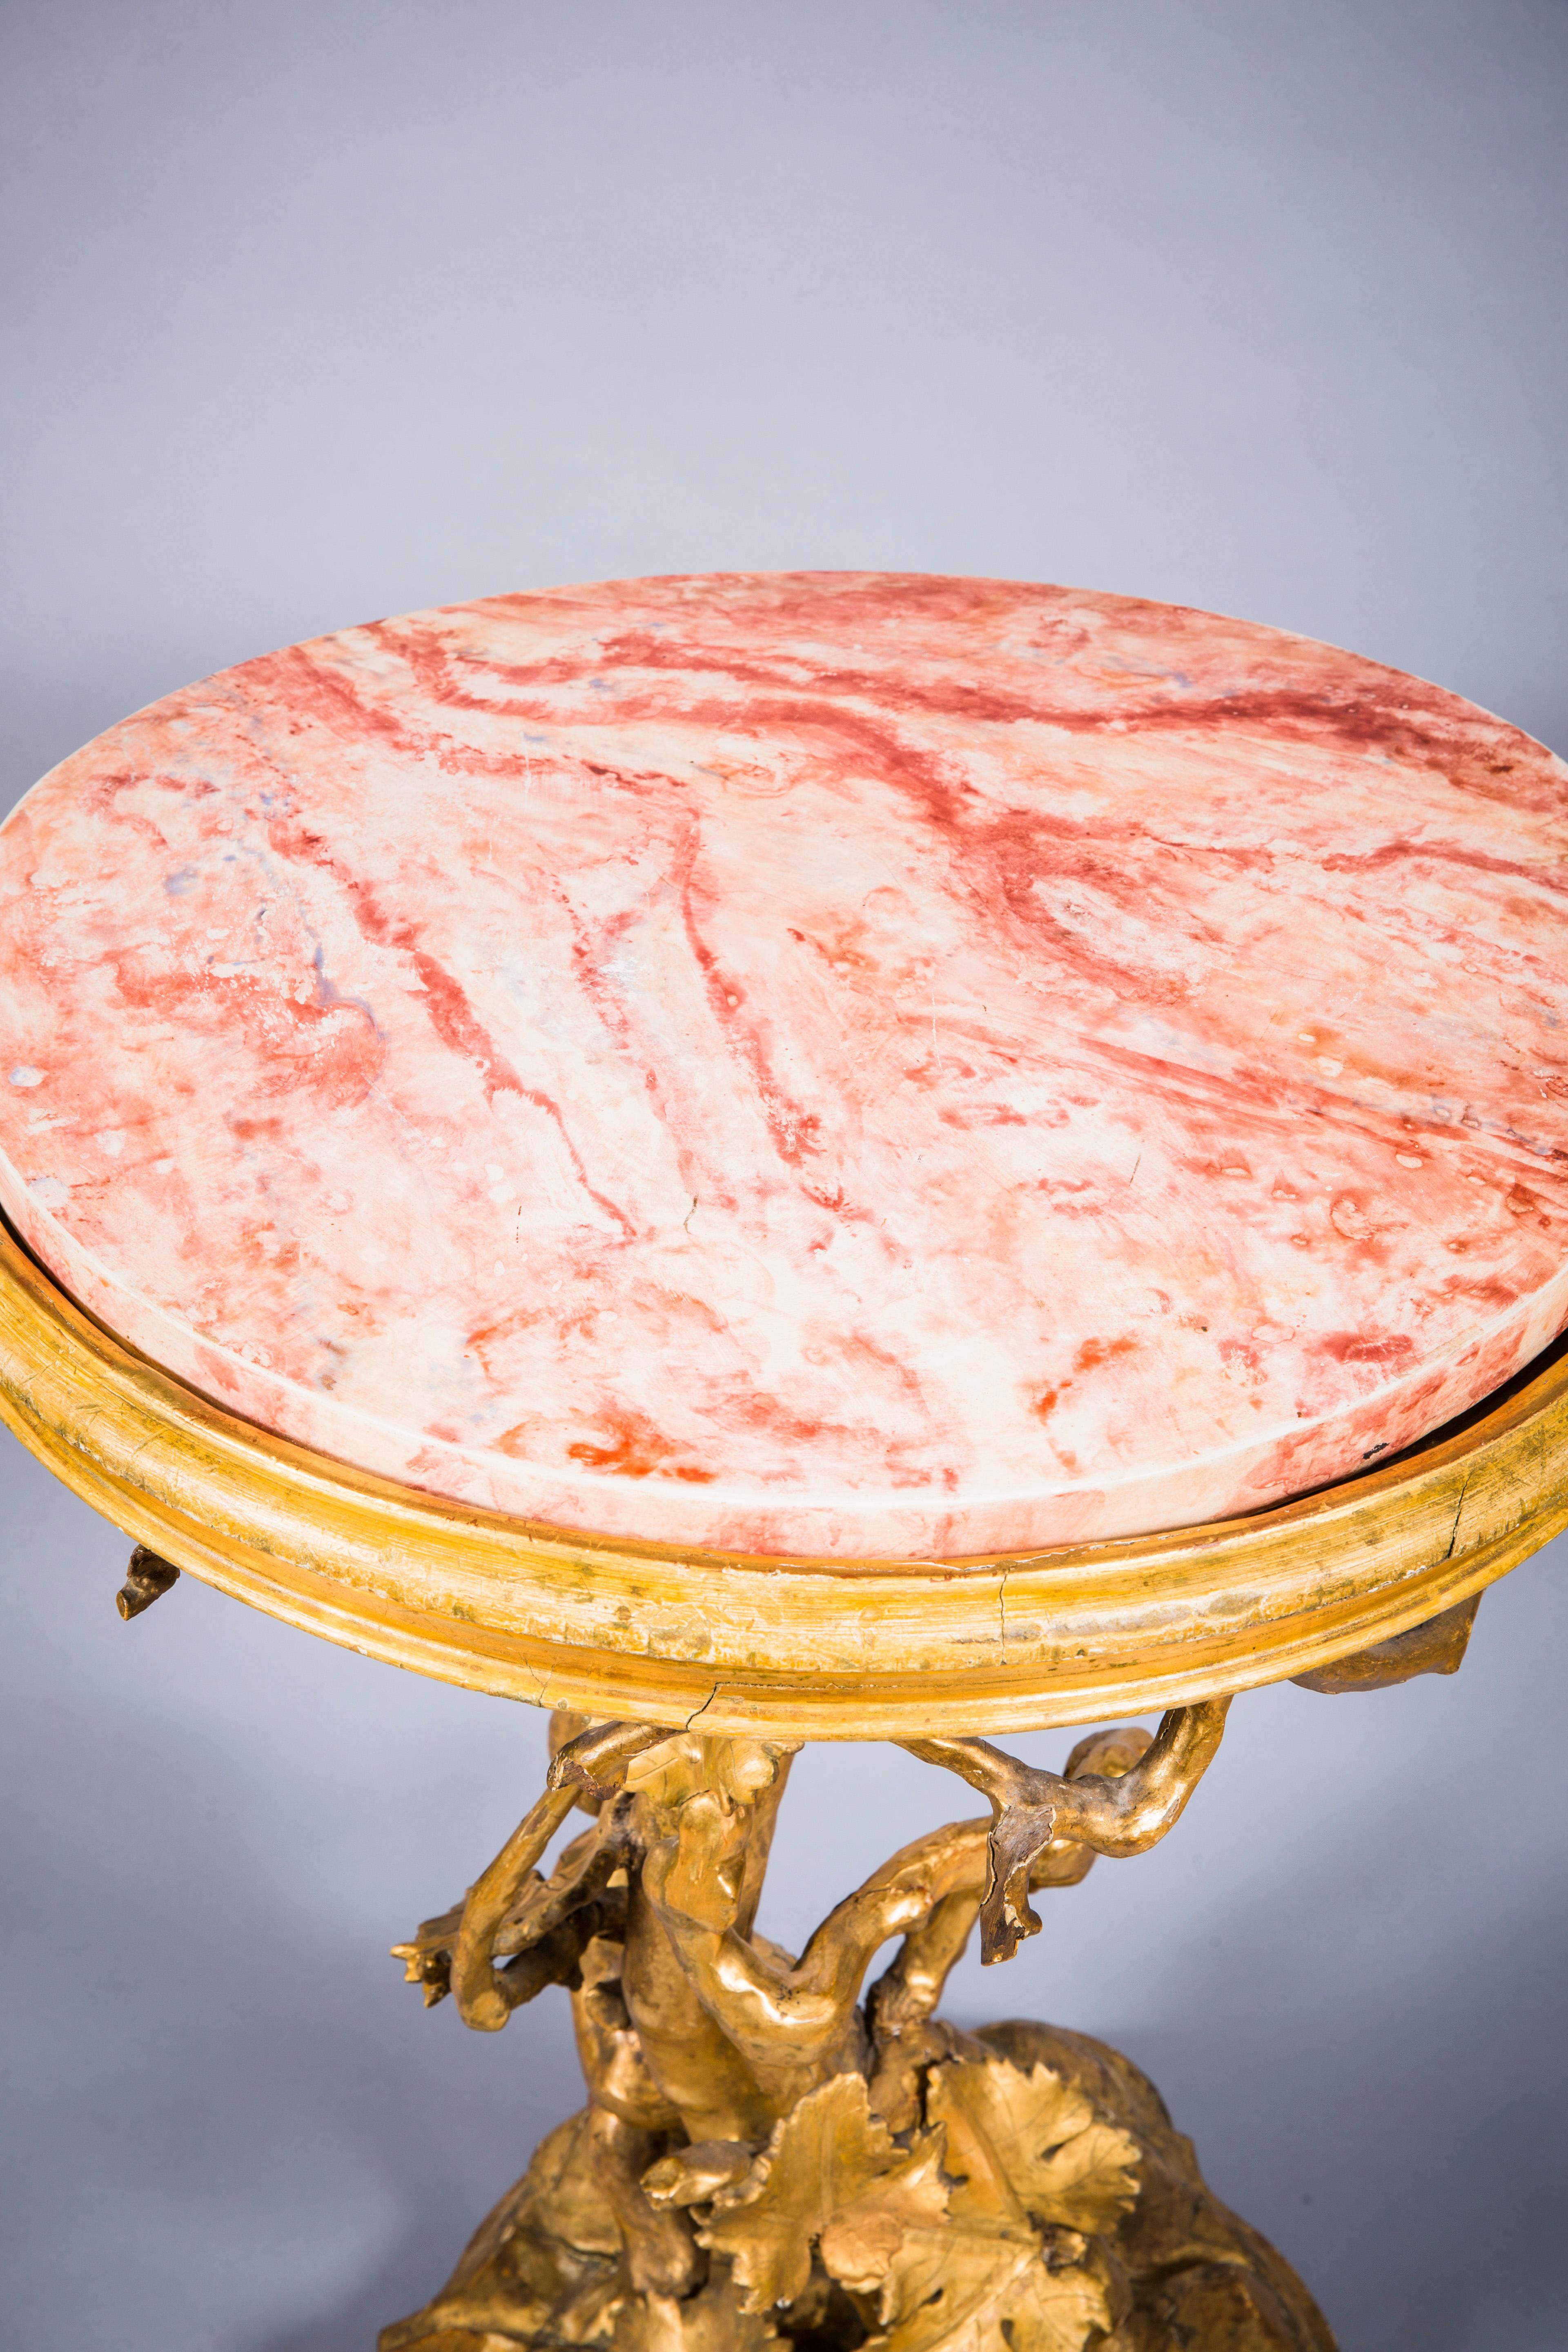 Rococo Giltwood Roman table.
Italian, 18th century 
The faux marble circular top above a grape leaf vine supports a shaped rockwork base. Height 32 3/4 inches (83.3 cm), diameter 22 1/2 inches (57.2 cm). 

IVN: 3464.